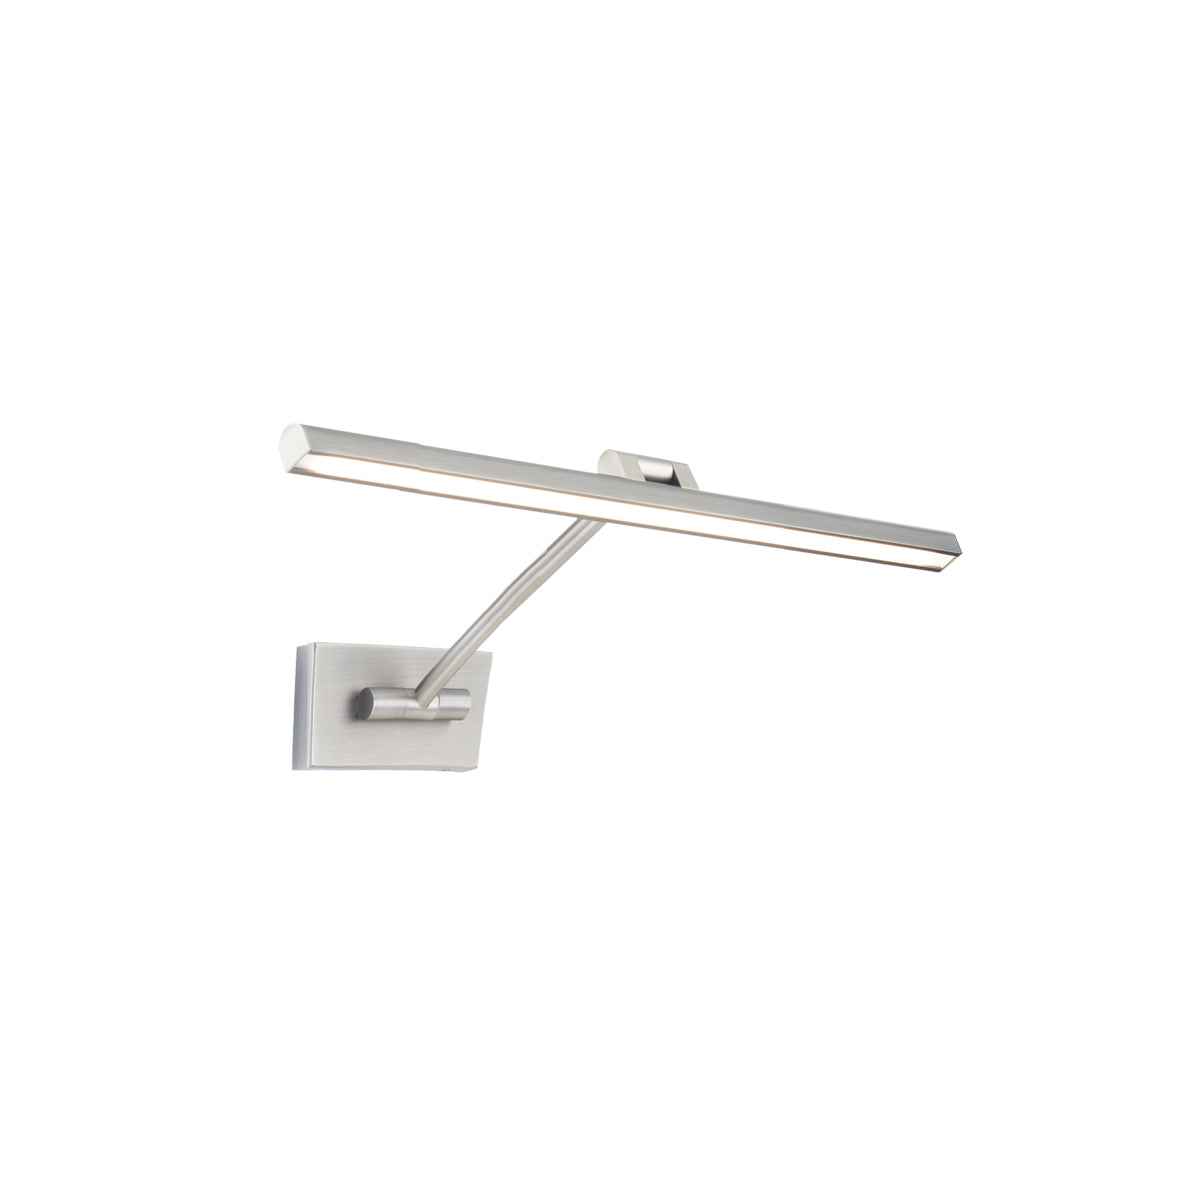 W.A.C. Canada - LED Swing Arm Wall Lamp - Reed - Brushed Nickel- Union Lighting Luminaires Decor